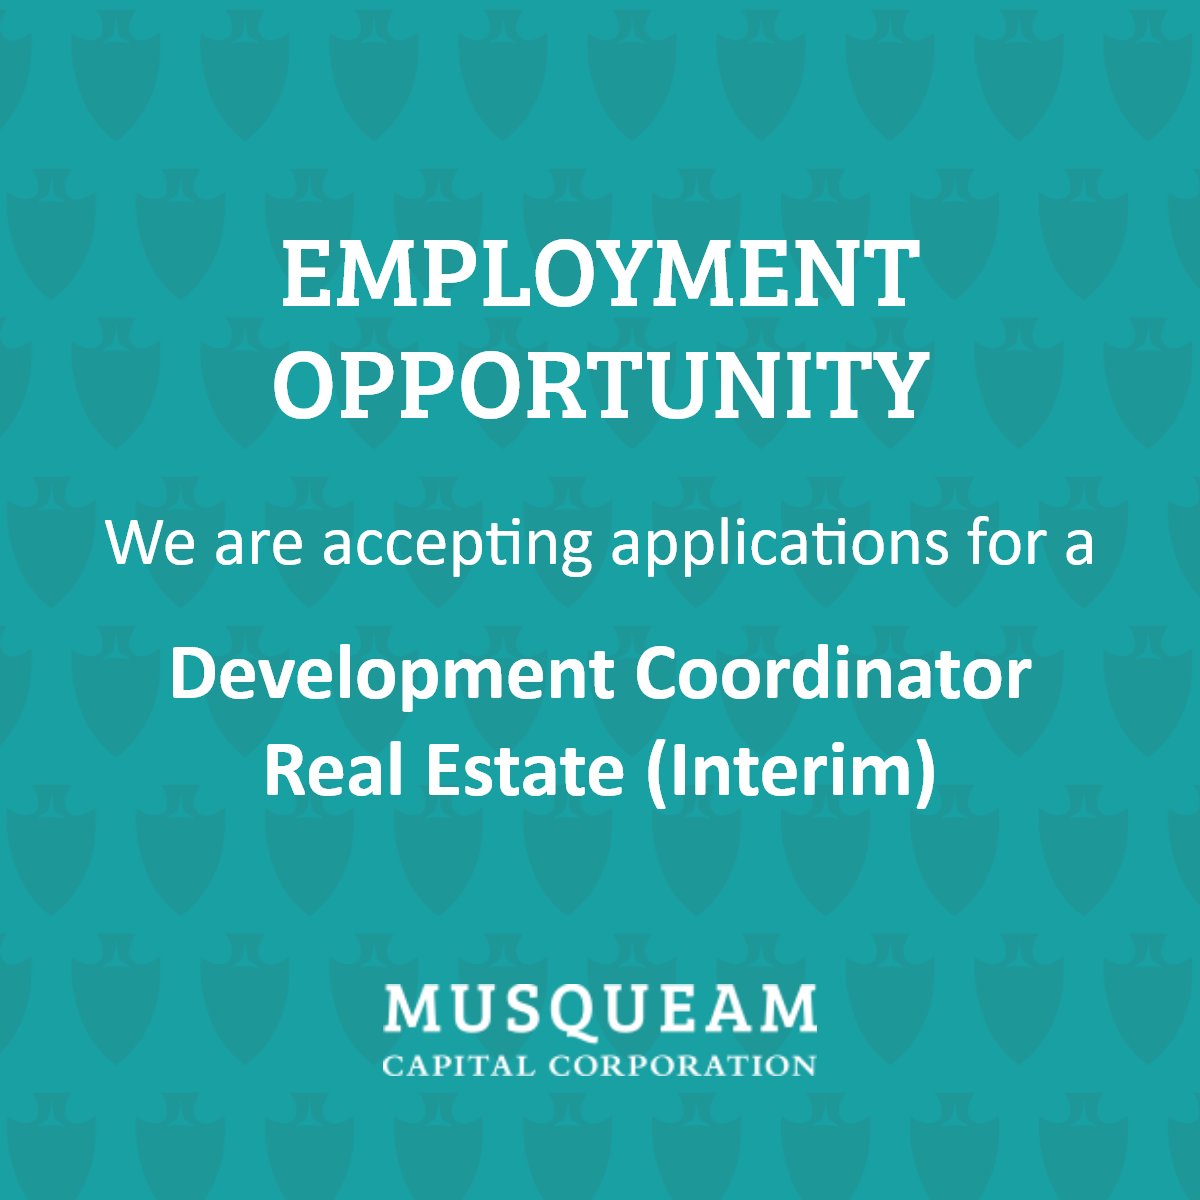 If you're passionate about real estate and ready to make an impact, MCC has an opening for a Real Estate Development Coordinator (Interim) to help shape our future projects. For job details and application instructions, see link in bio.